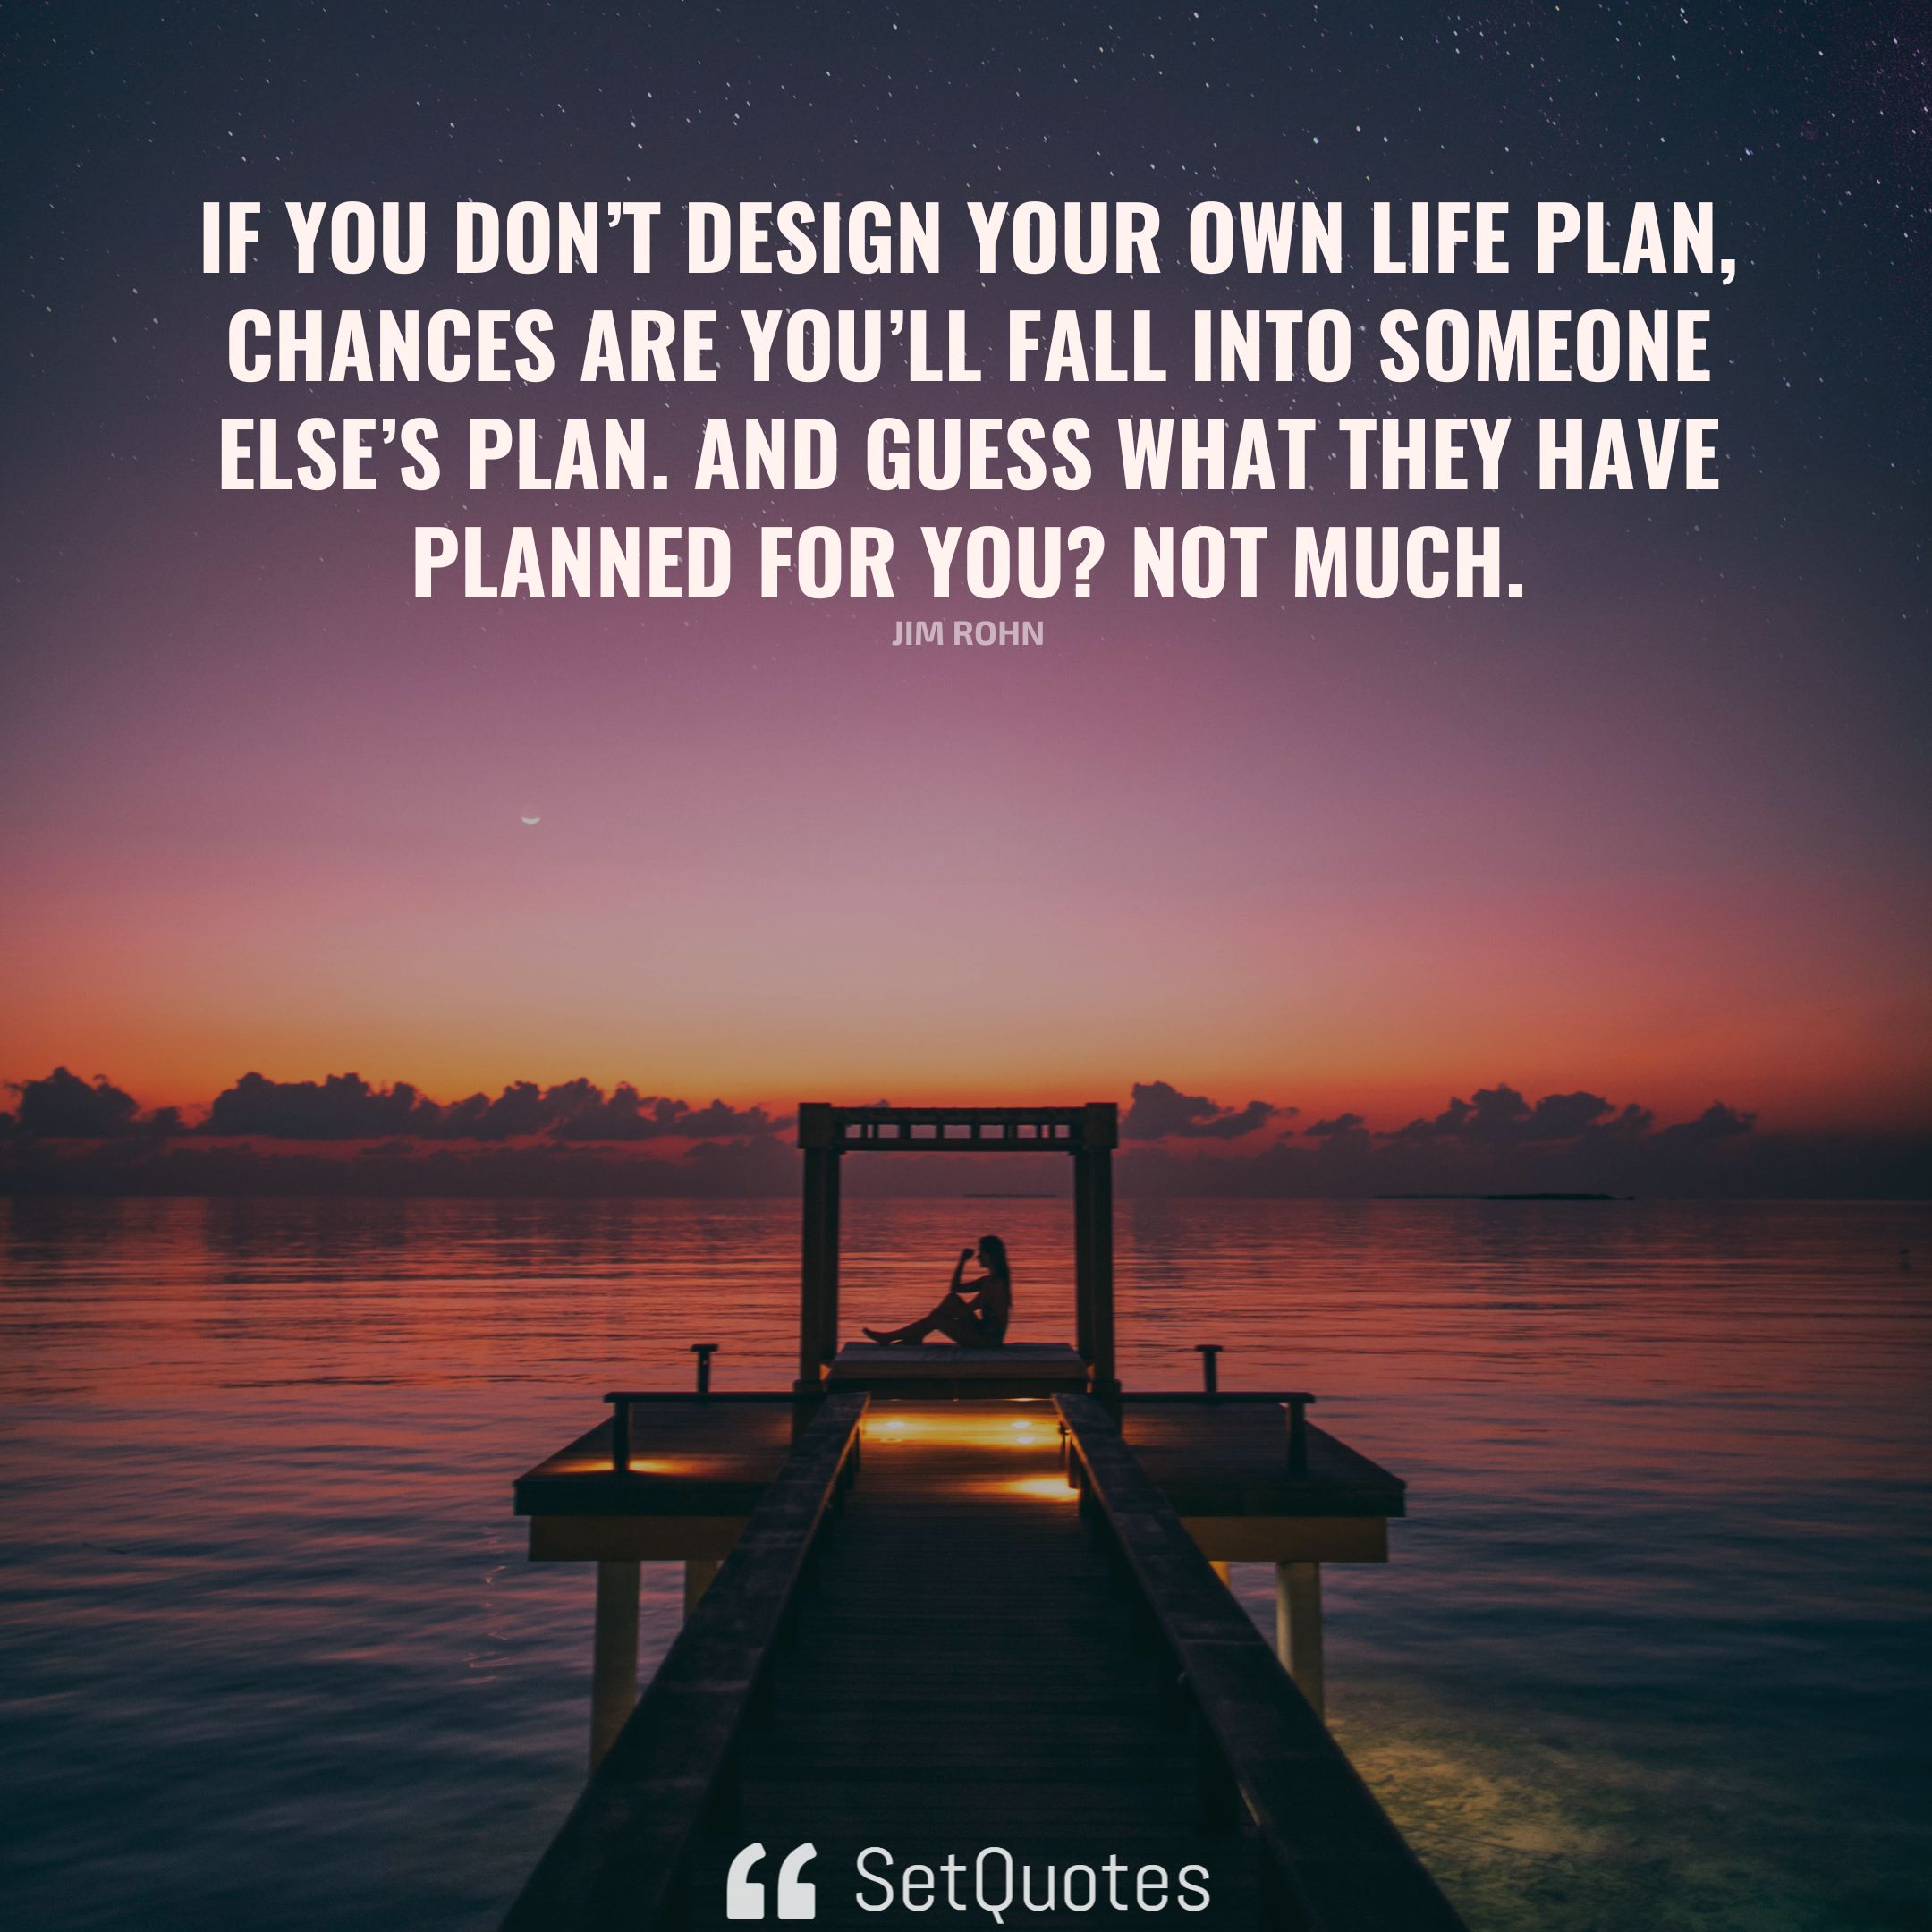 If you don’t design your own life plan, chances are you’ll fall into someone else’s plan. And guess what they have planned for you Not much. – Jim Rohn